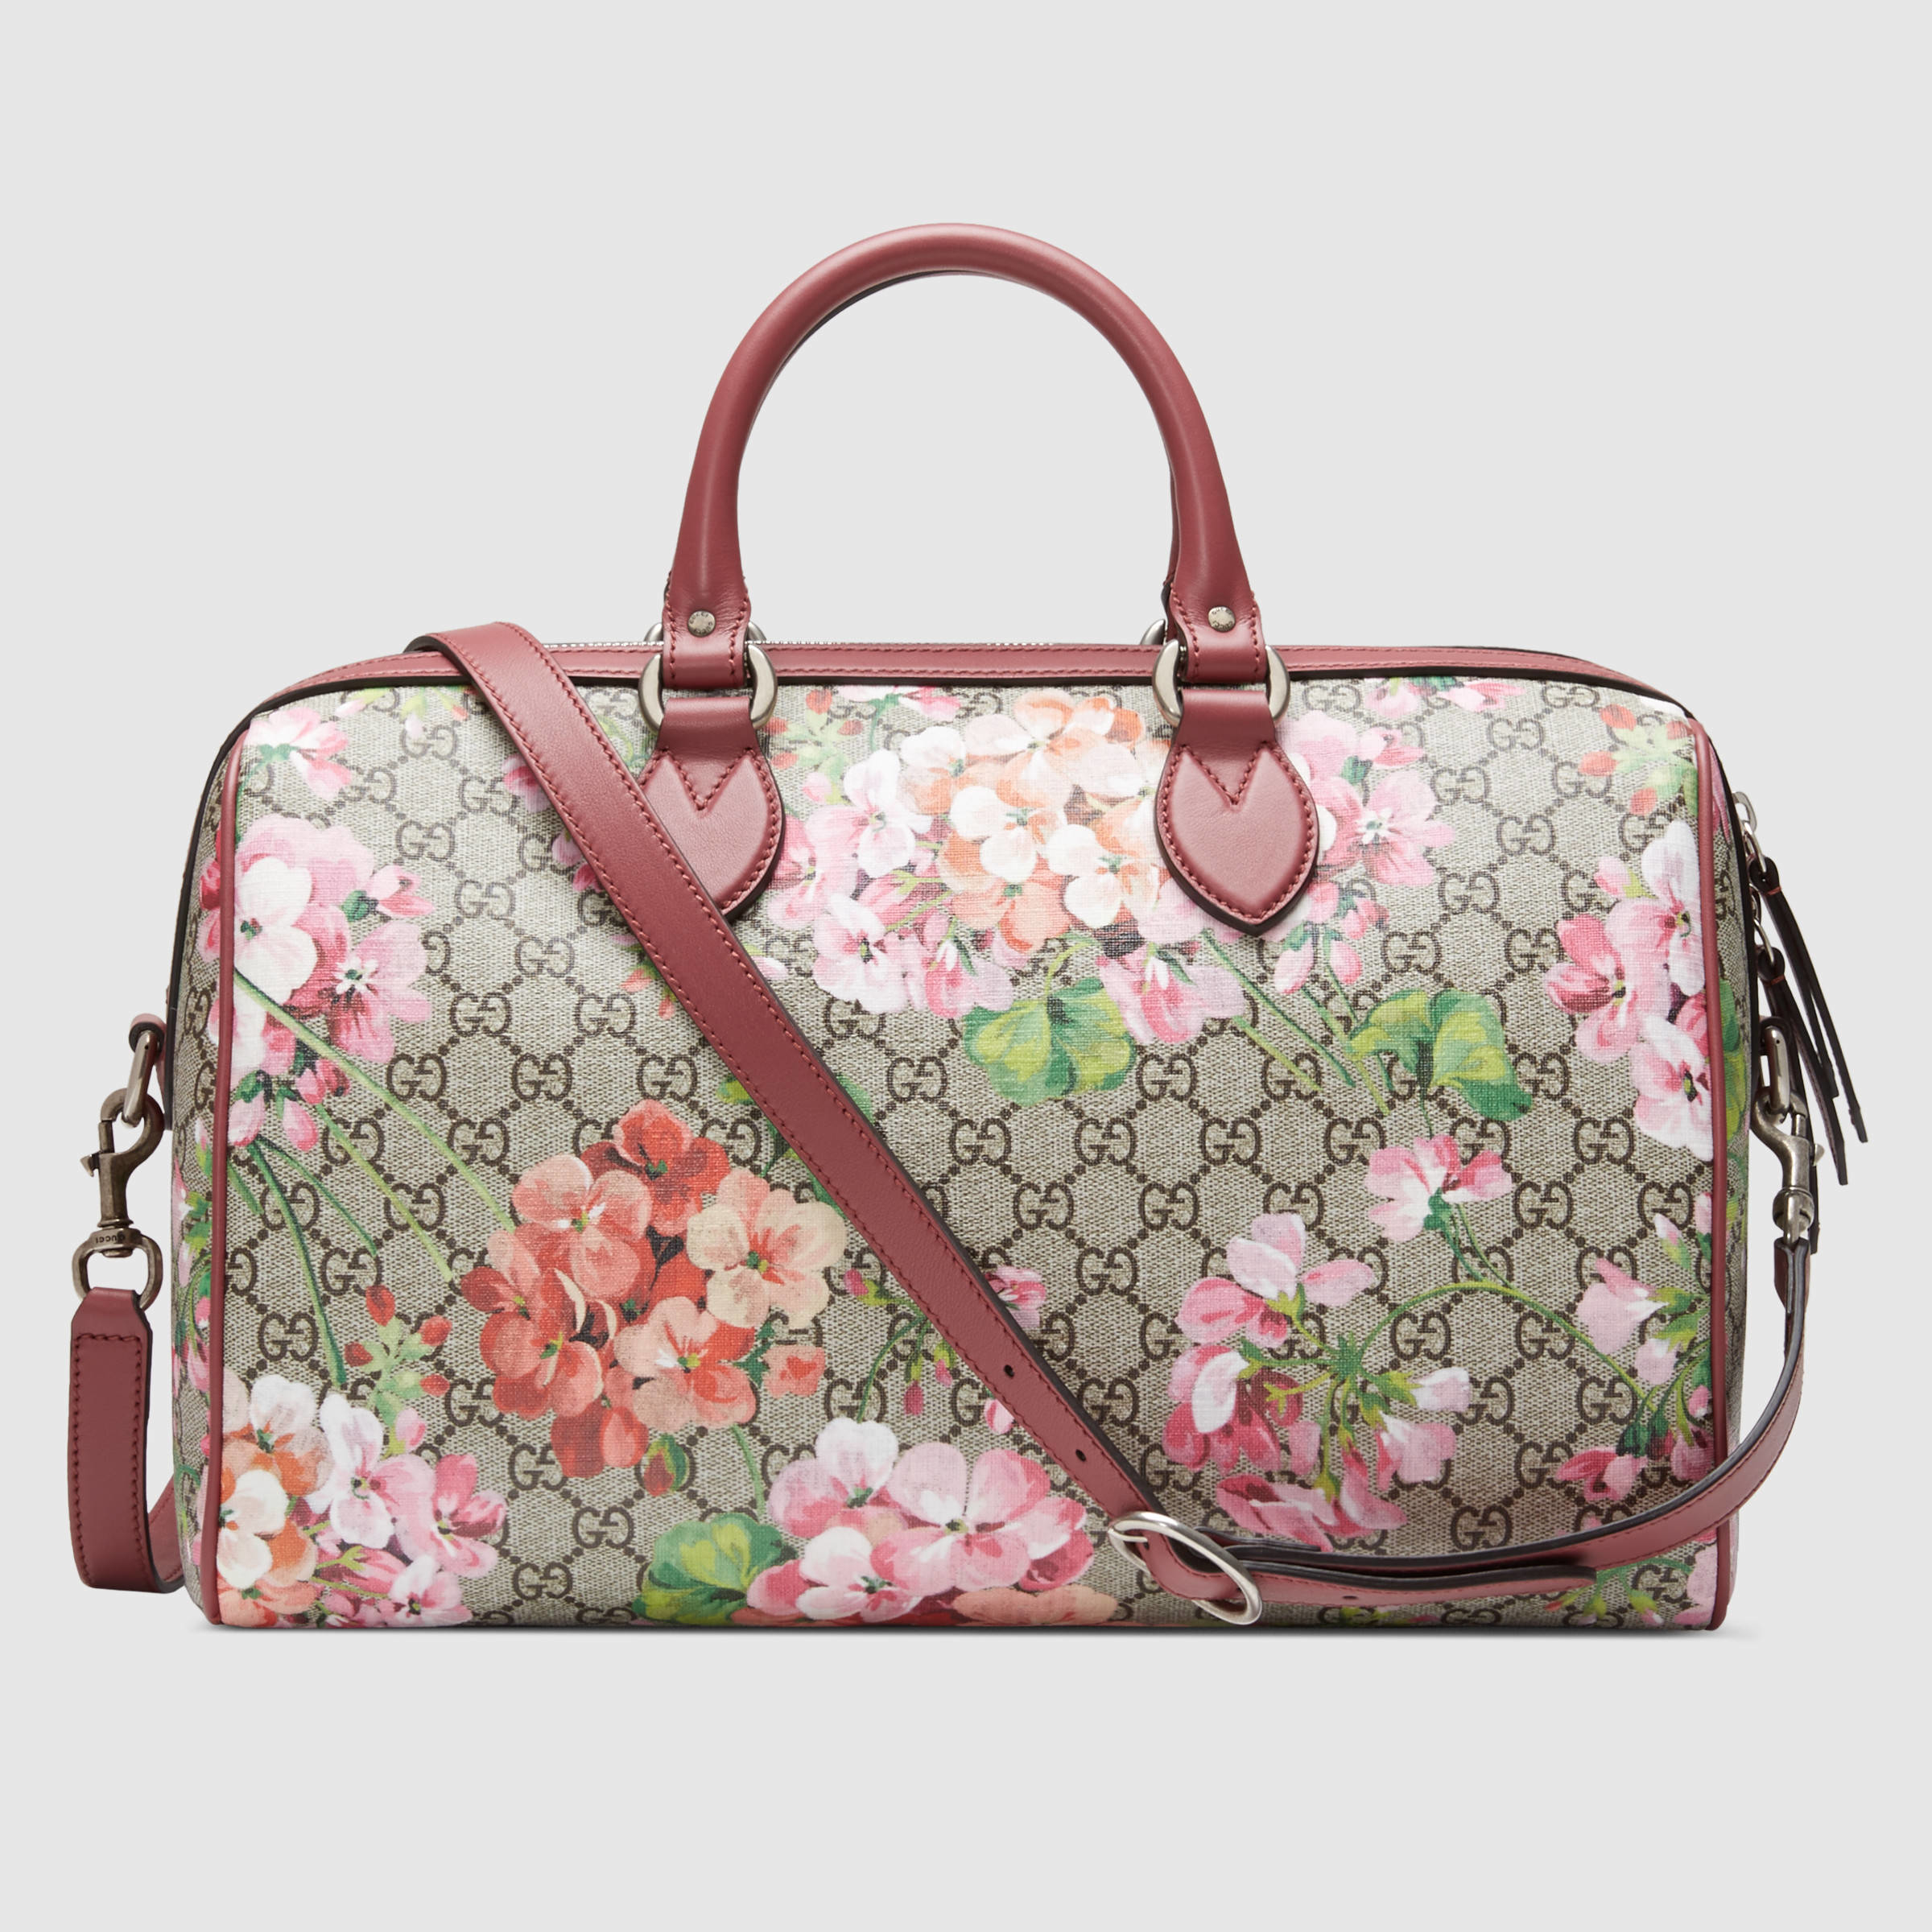 Gucci Blooms Gg Supreme Top Handle Bag in Pink - Lyst